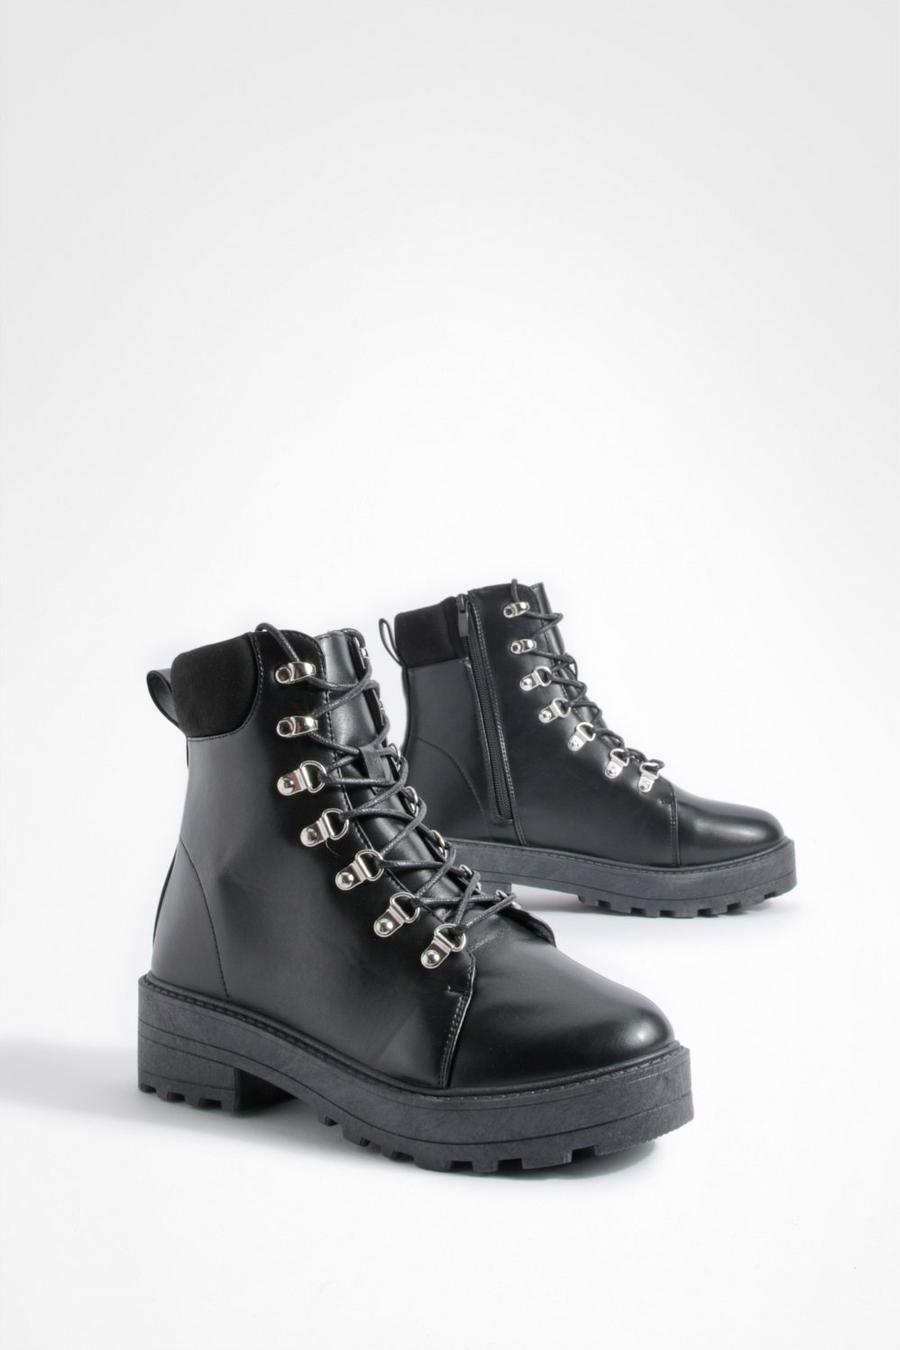 Black Wide Width Eyelet Detail Lace Up Chunky Combat Boots